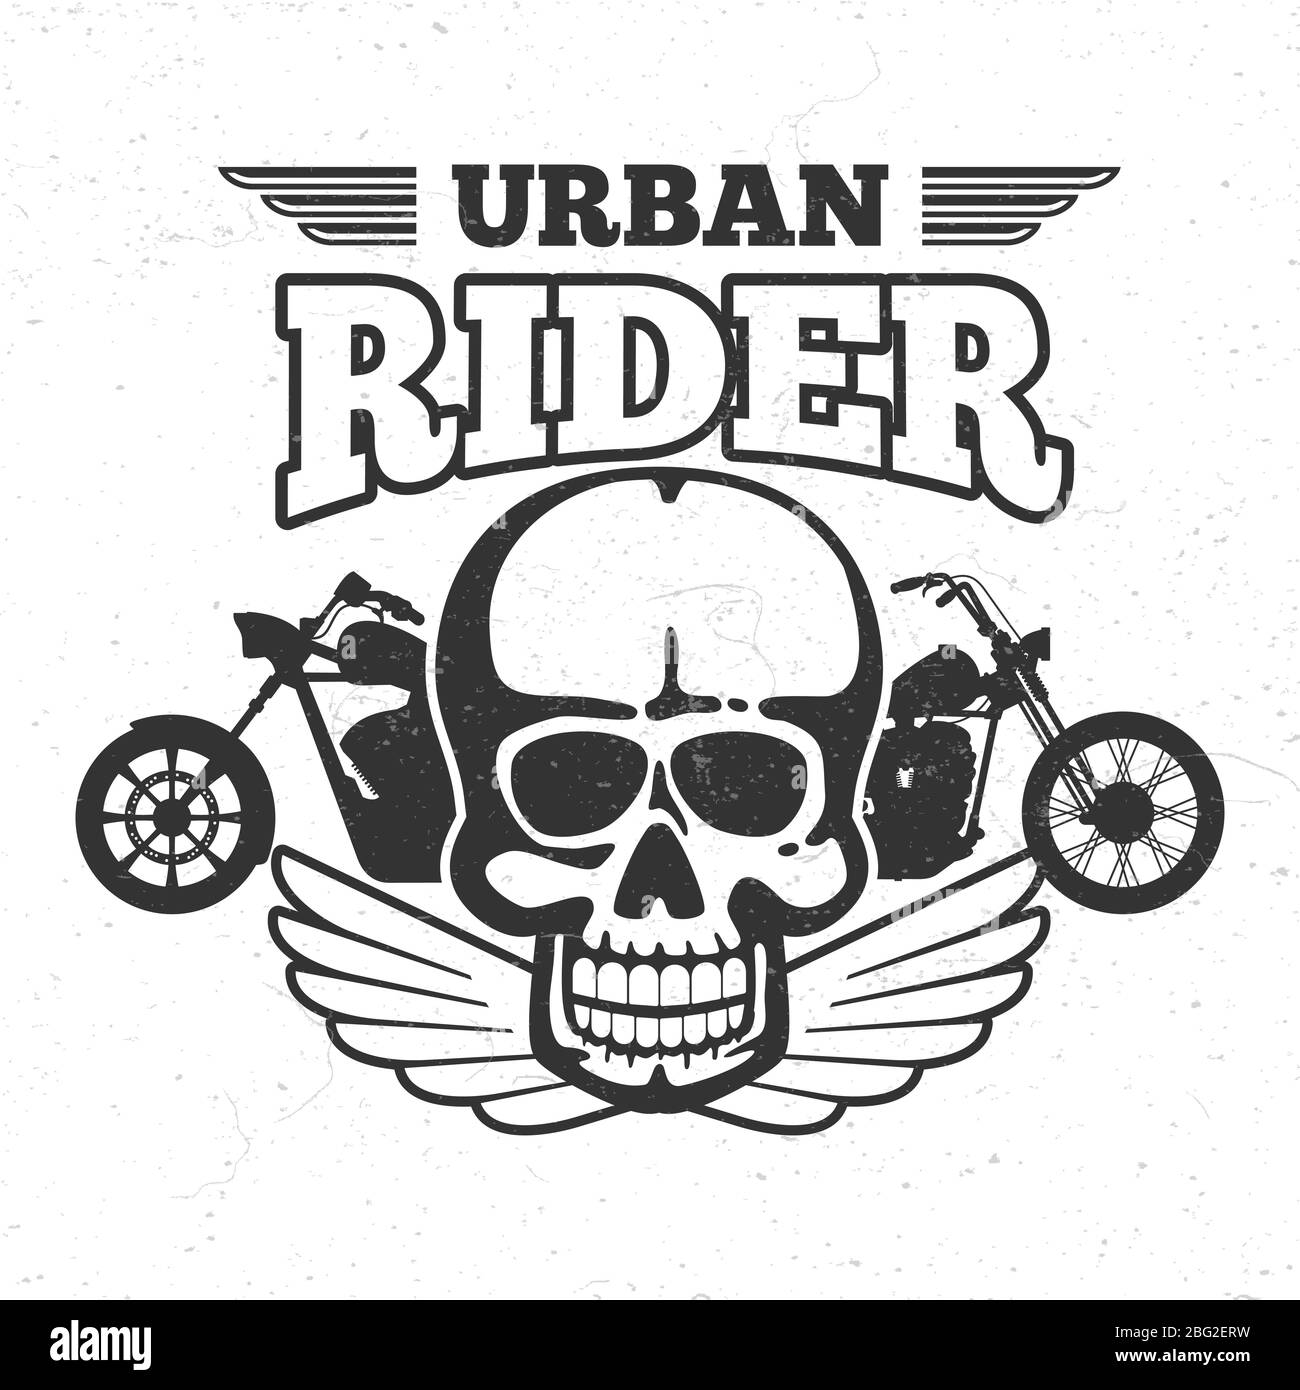 Motorbike club vintage embem with motorcycle and skull. Vector illustration Stock Vector